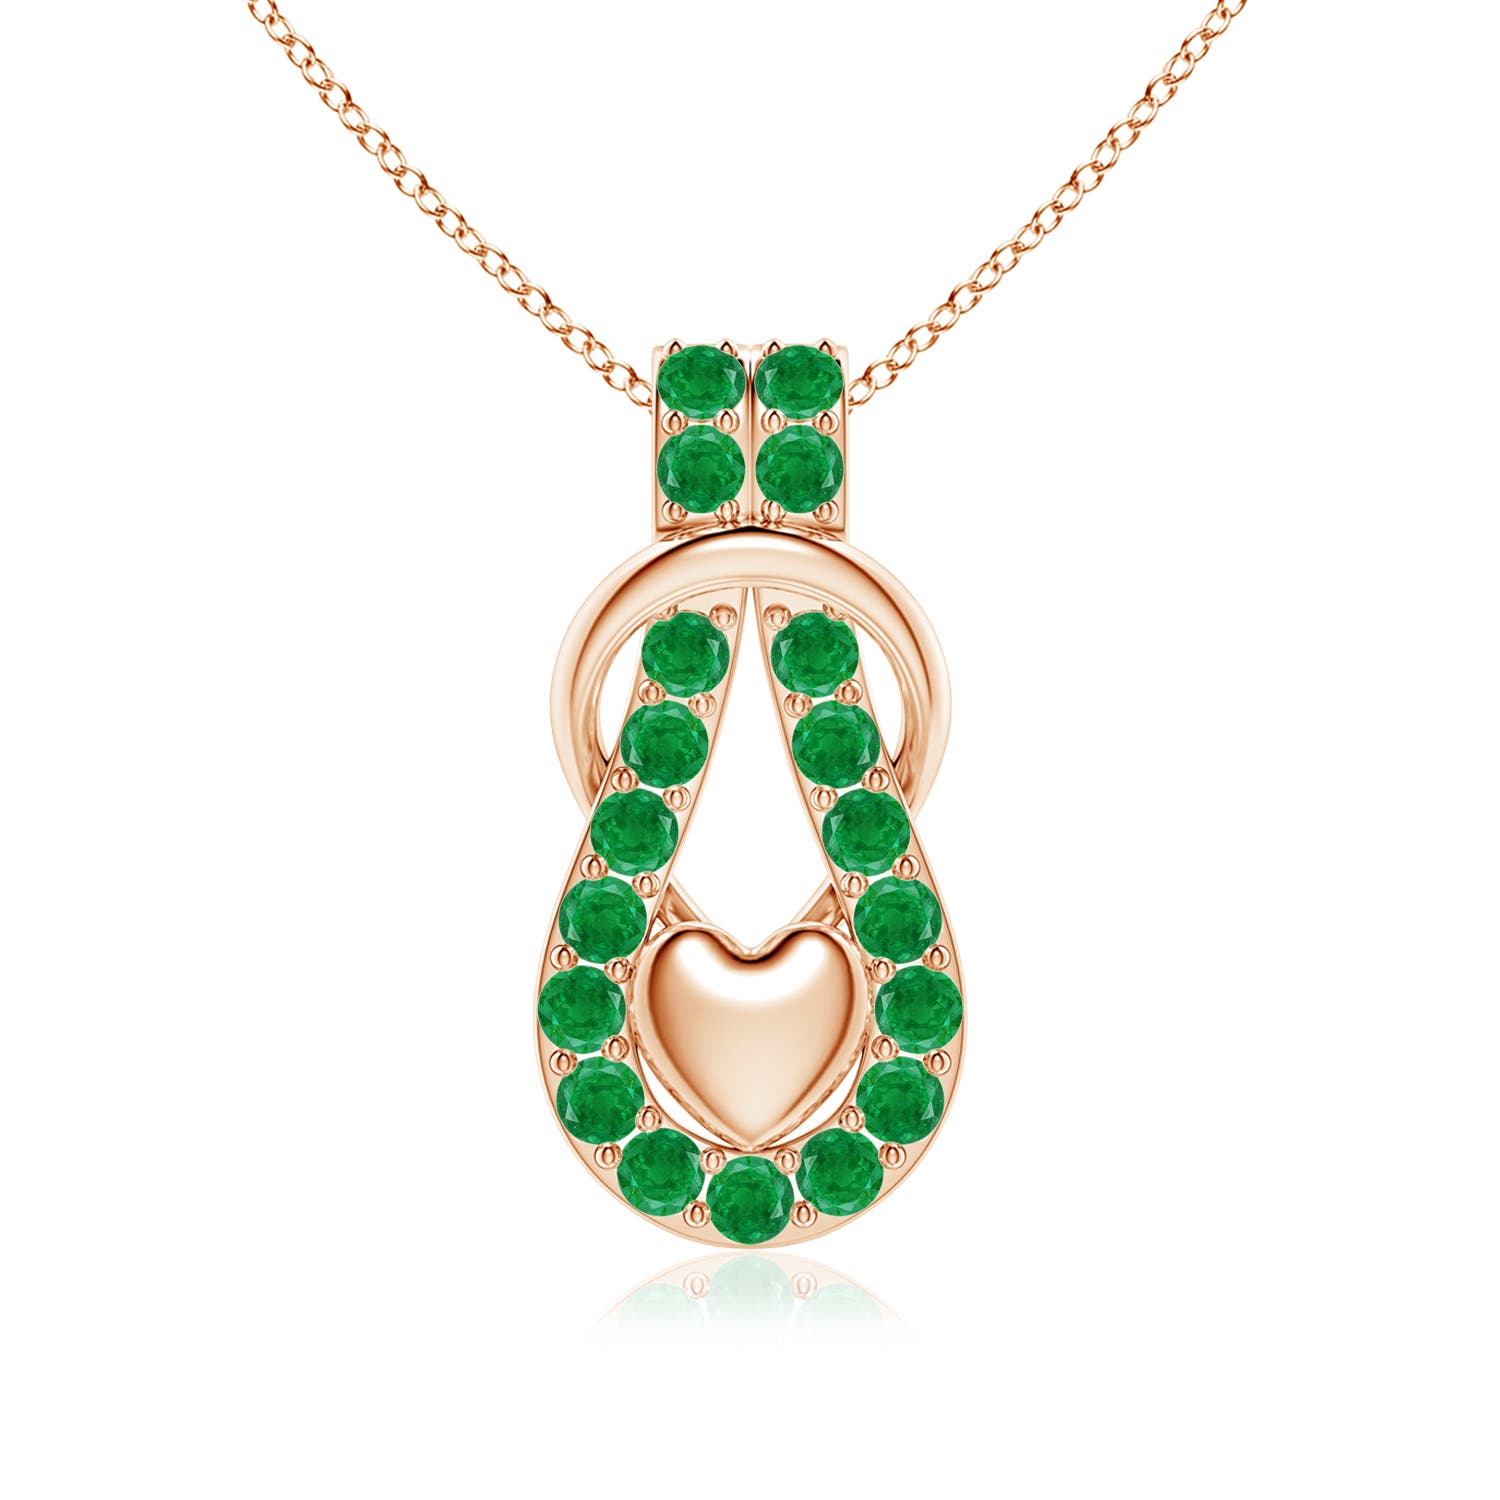 AA - Emerald / 1.9 CT / 18 KT Rose Gold